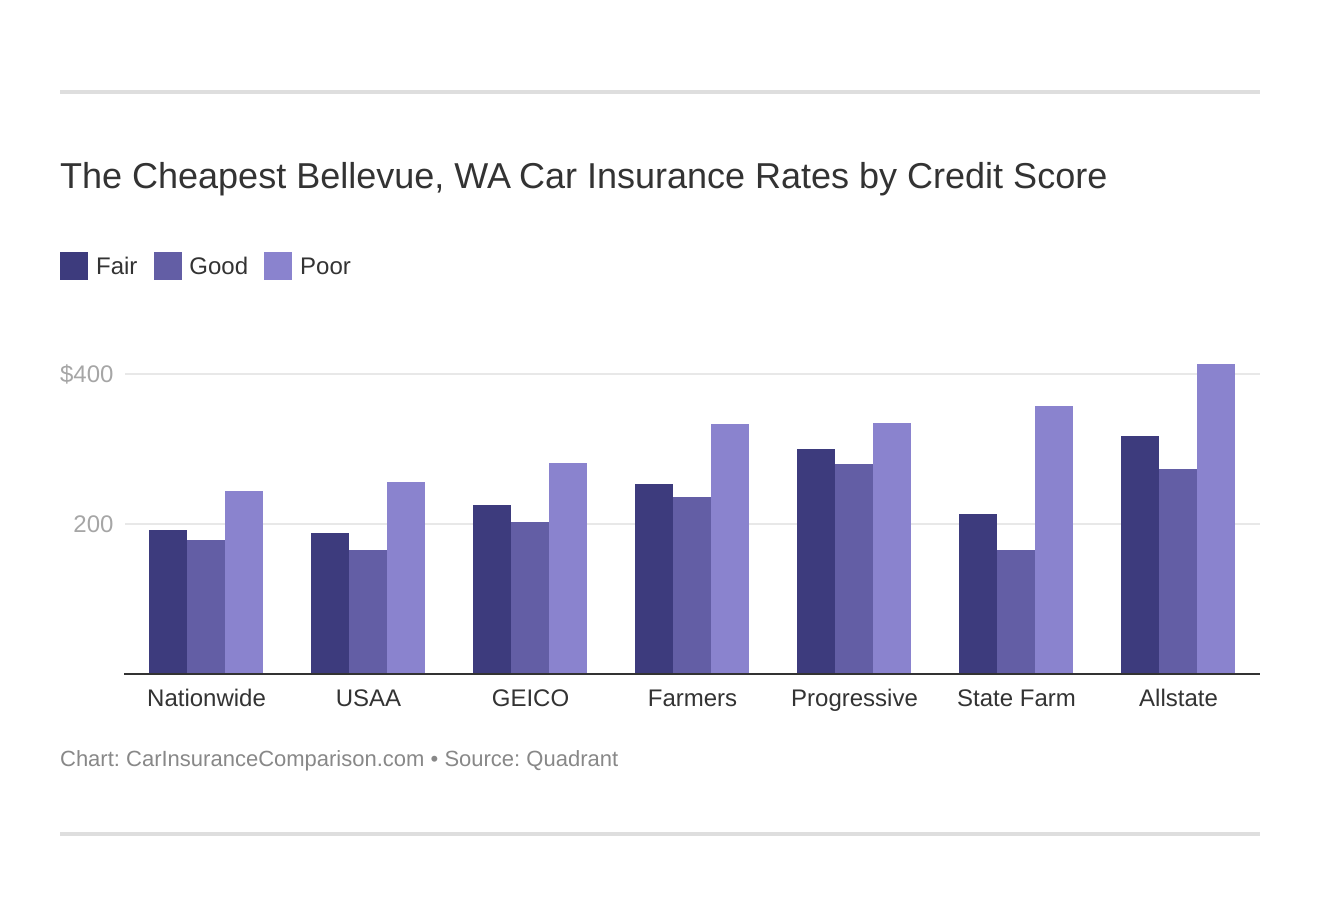 The Cheapest Bellevue, WA Car Insurance Rates by Credit Score